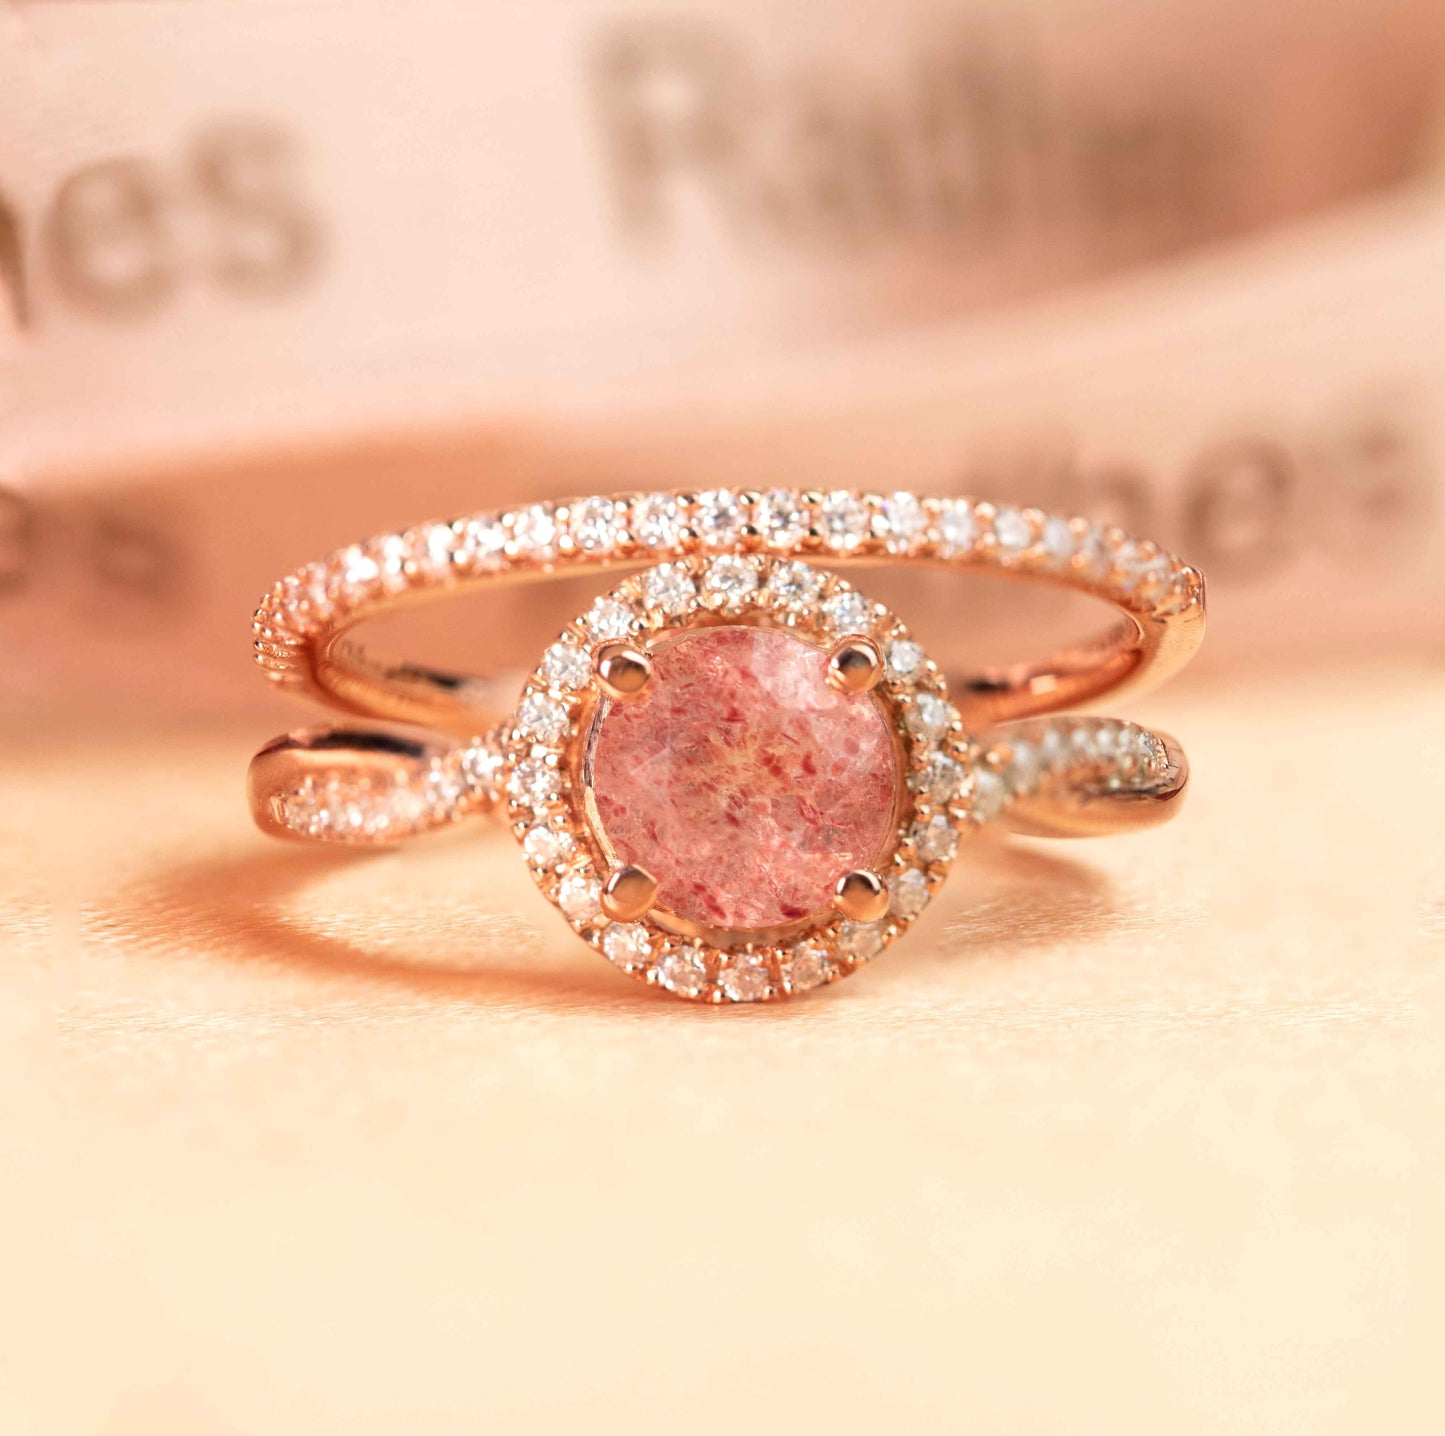 Twist Shank 1.5 carat Round Cut Strawberry Quartz and Diamond Pave Halo Ring Set for Women in Rose Gold